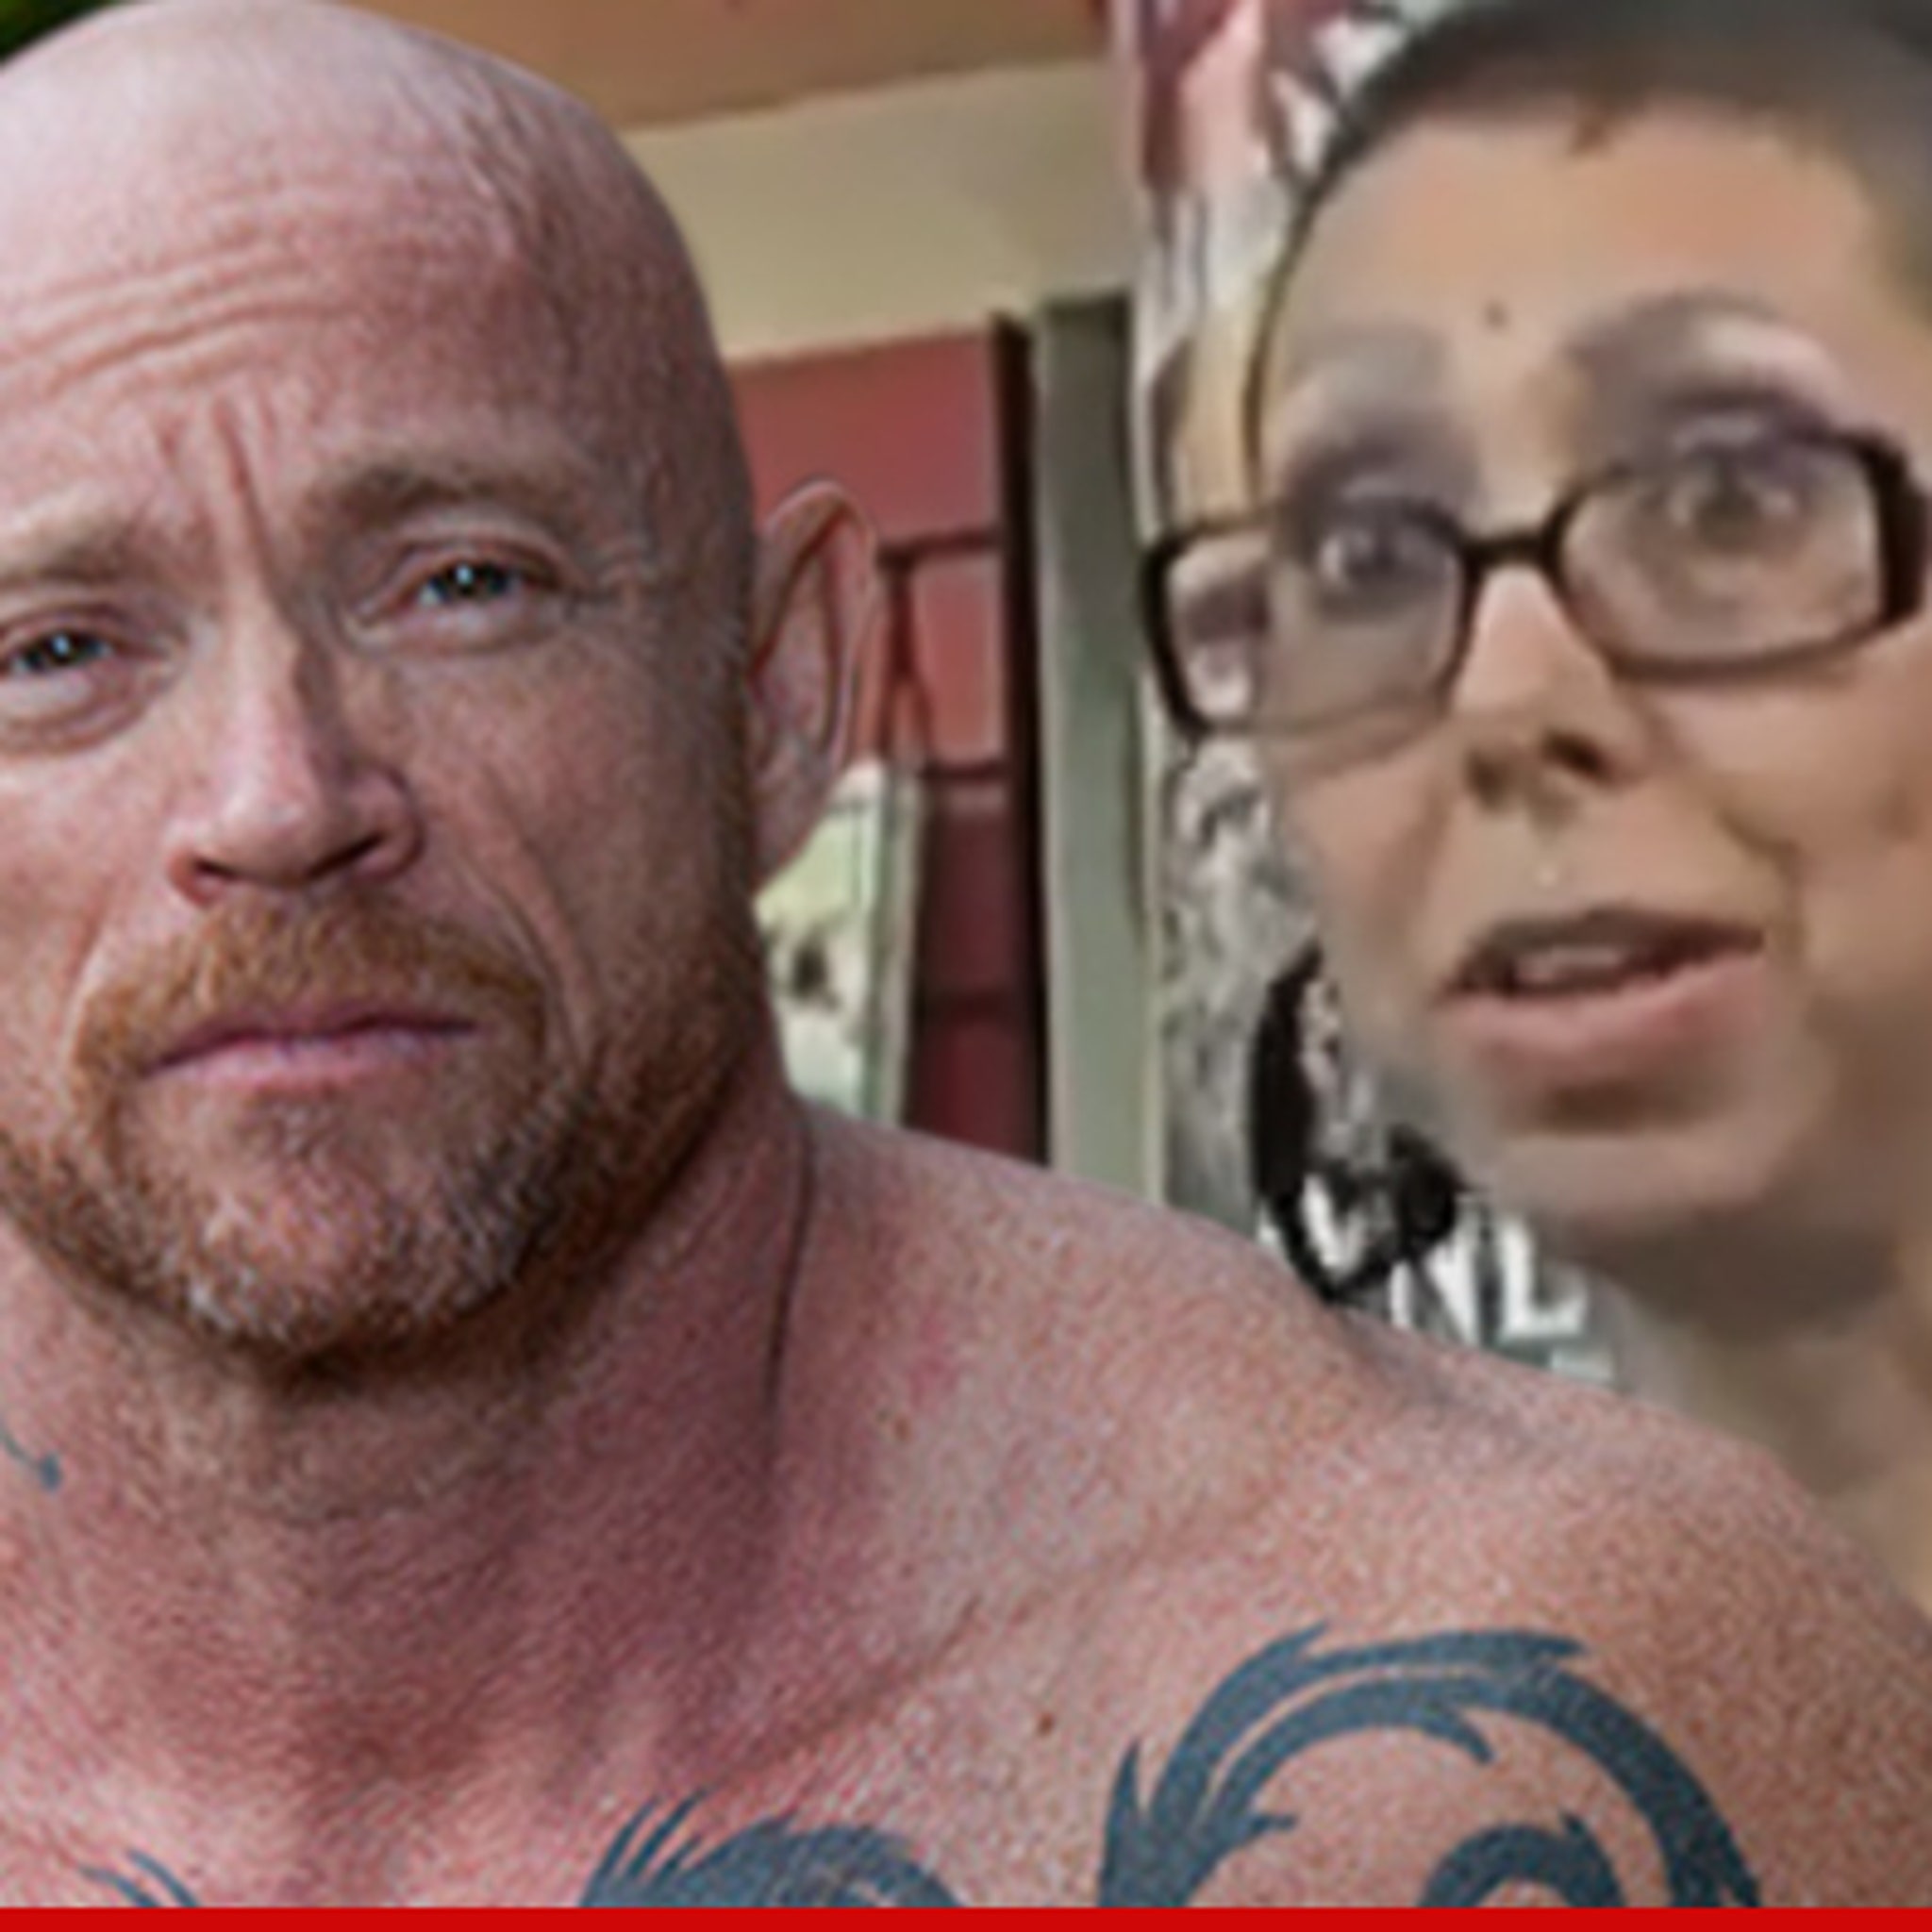 Transsexual Porn Star Buck Angel -- I'm a Man, Baby! Now I ...